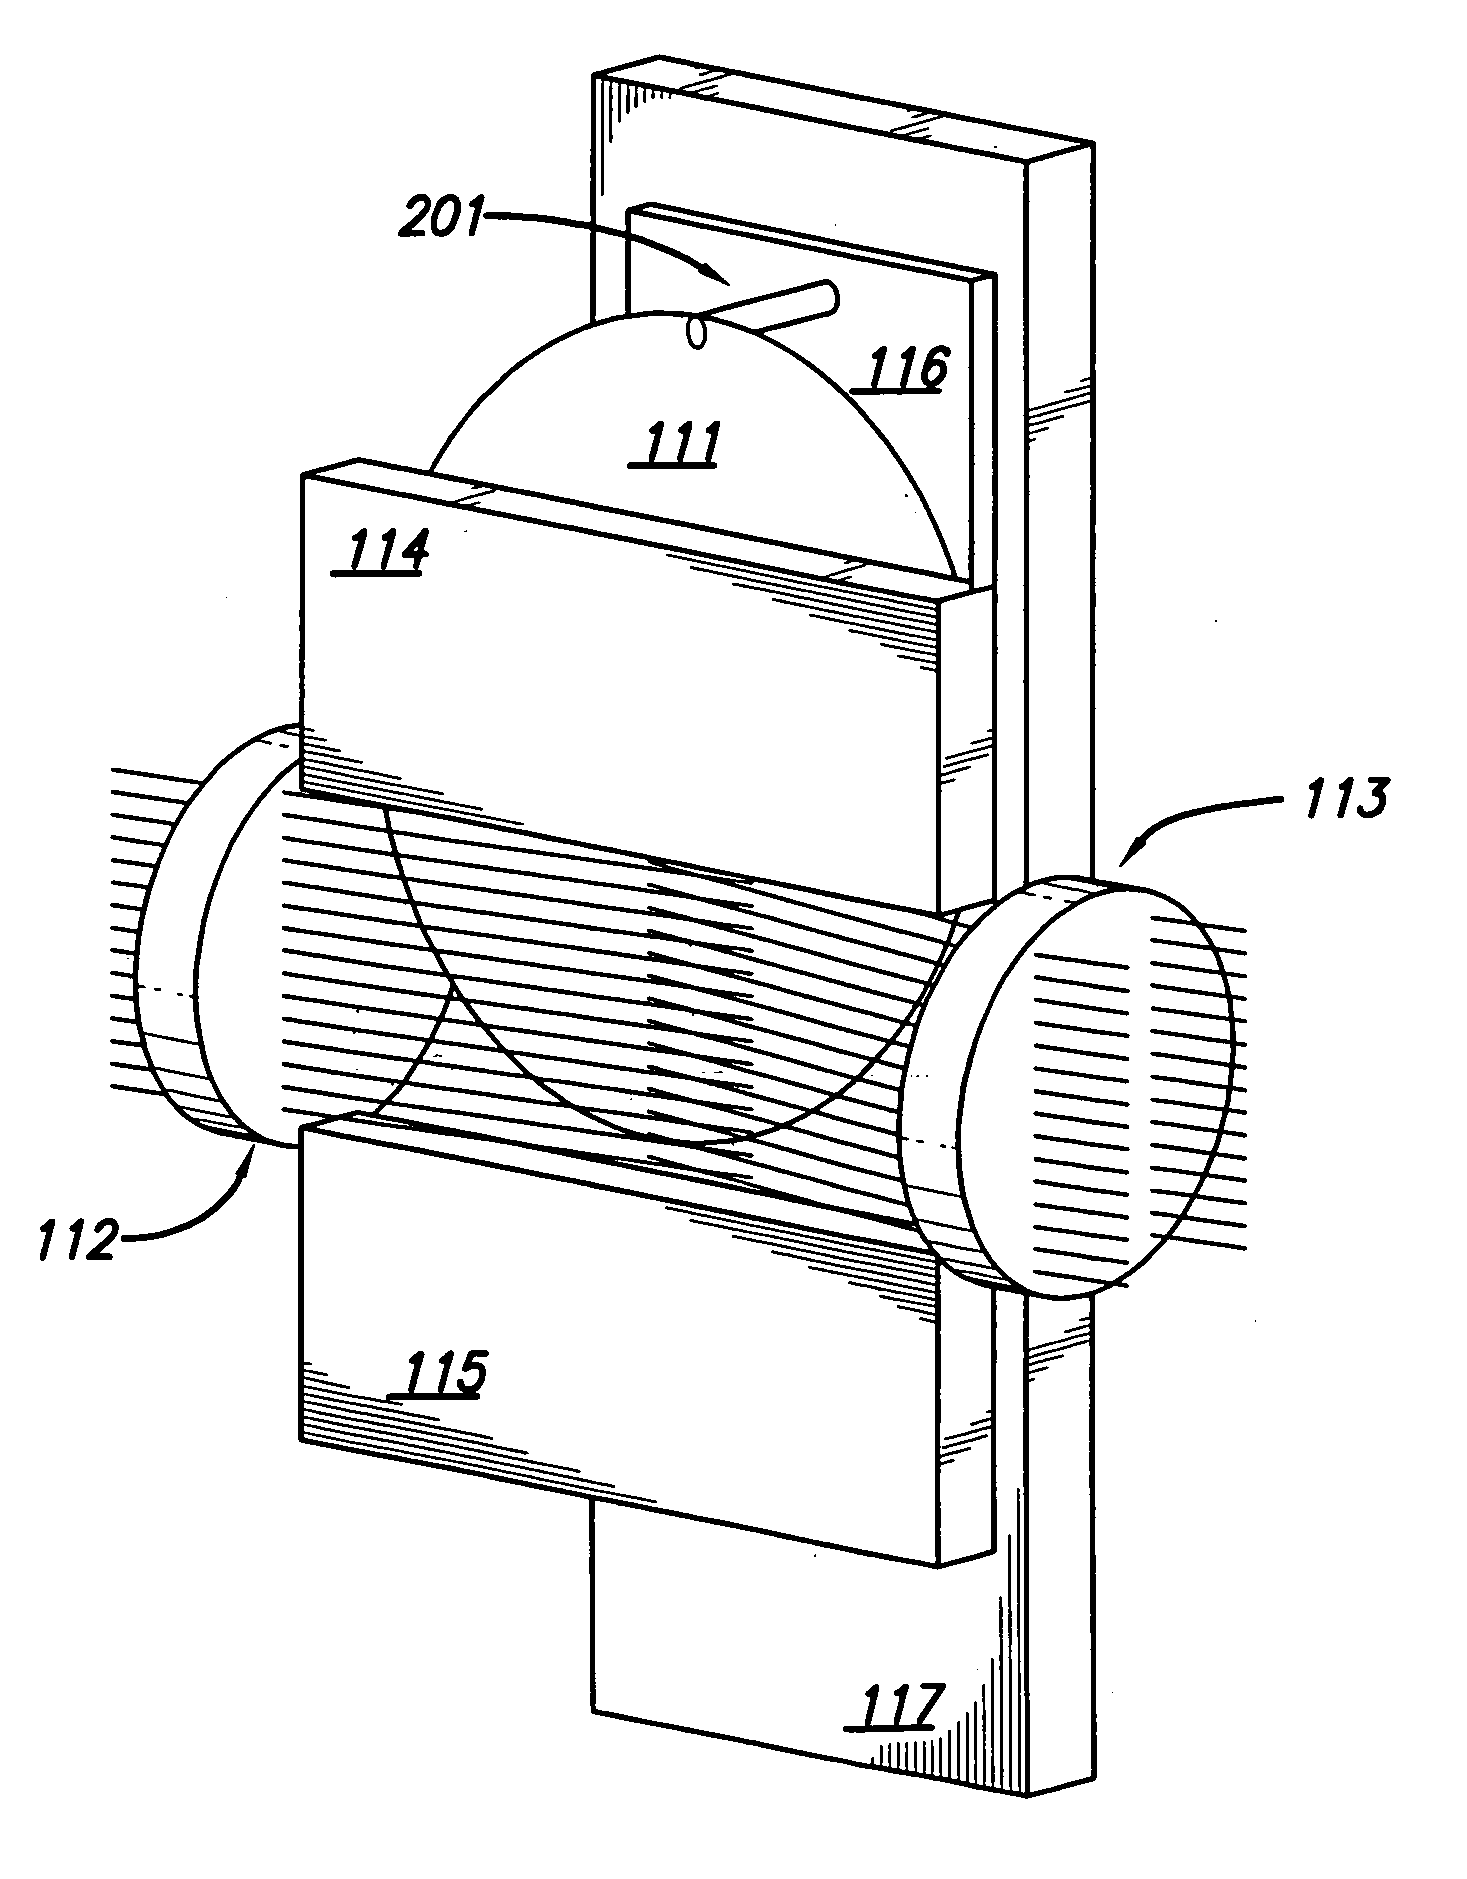 Method and apparatus for scanning, stitching, and damping measurements of a double-sided metrology inspection tool